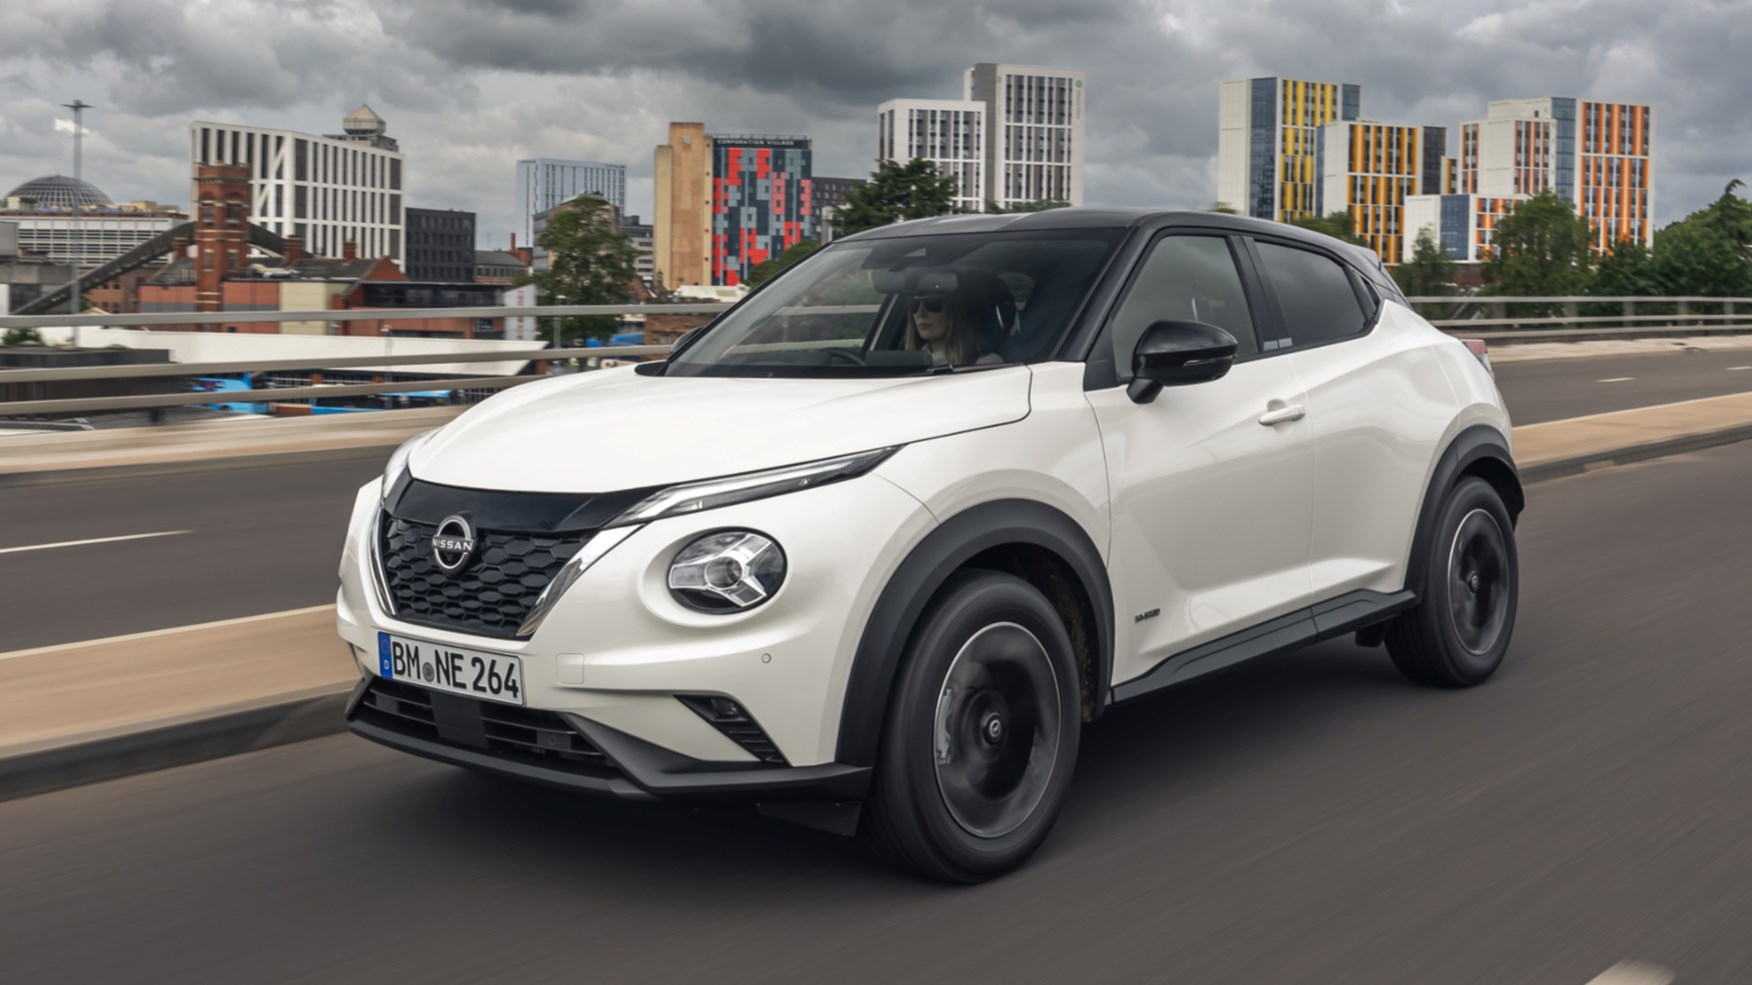 https://car-images.bauersecure.com/wp-images/151969/1752x1168/juke_hybrid_001.jpg?mode=max&quality=90&scale=down